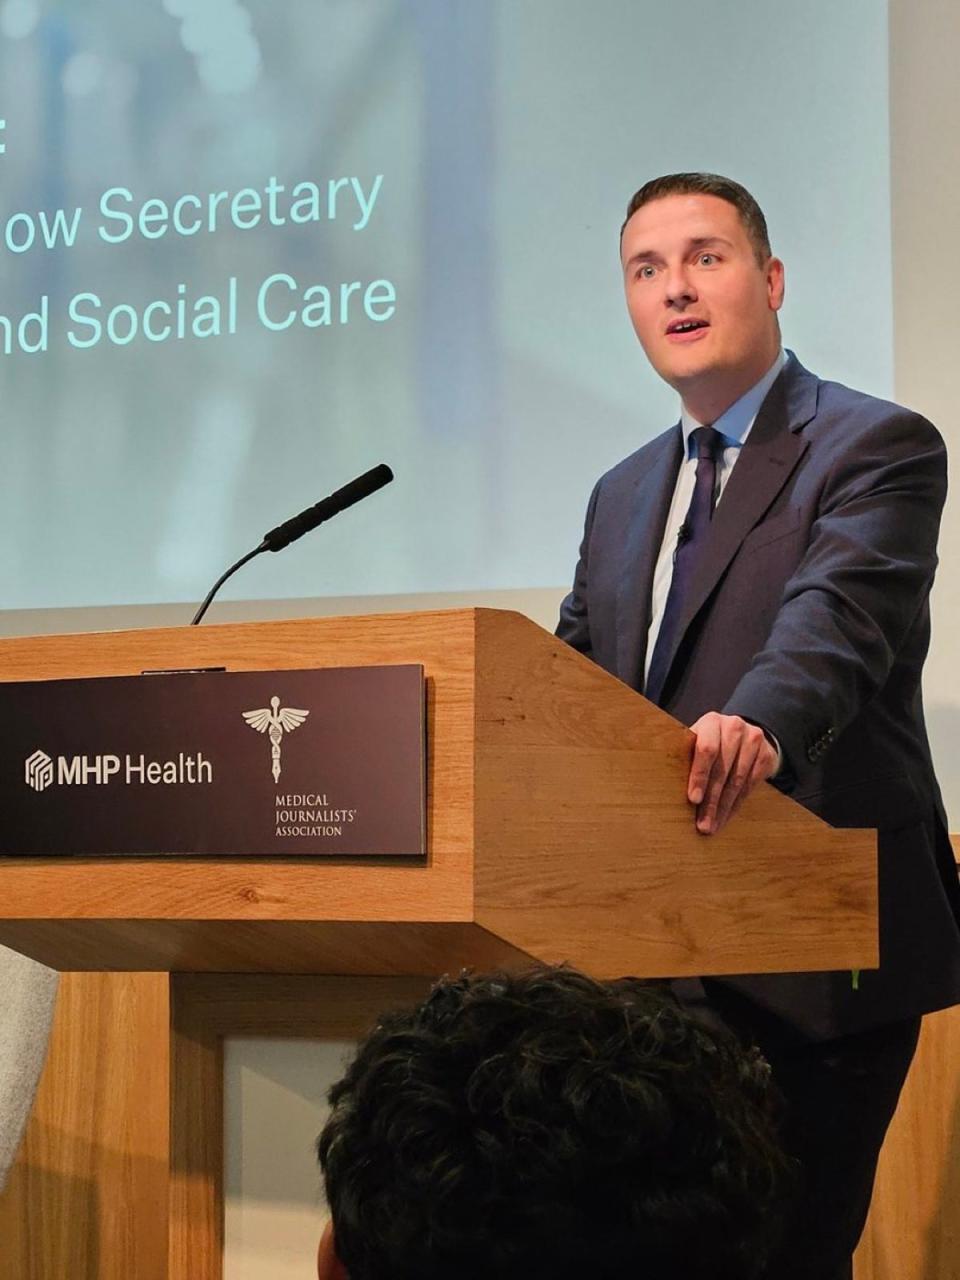 Wes Streeting, the Labour shadow health secretary, speaking at a Medical Journalists‘ Association event (Medical Journalists' Association)